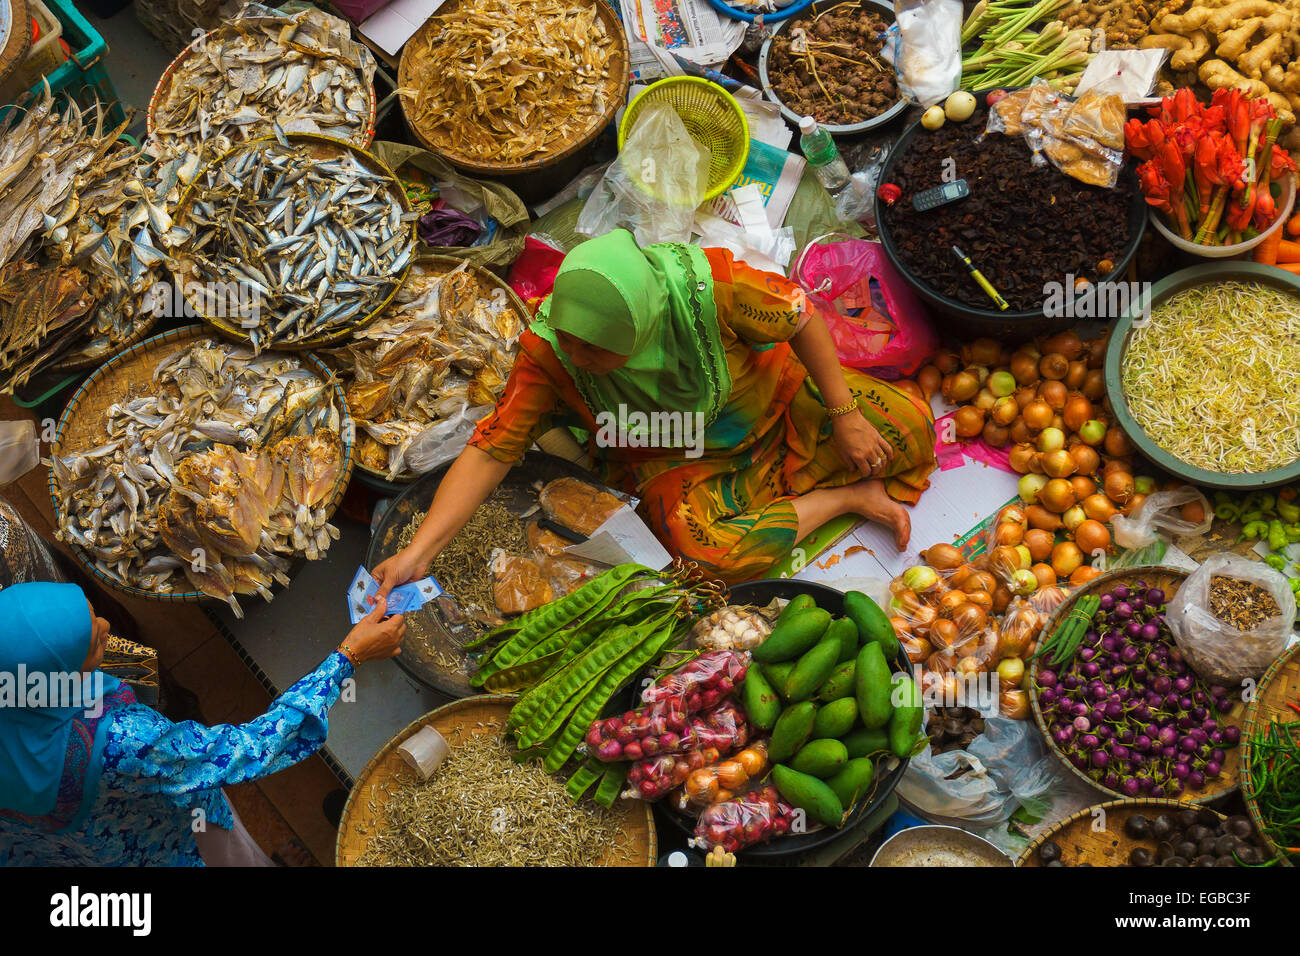 A local seller doing her daily transaction of selling the goods for visitors at Pasar Besar Siti Khadijah. Stock Photo